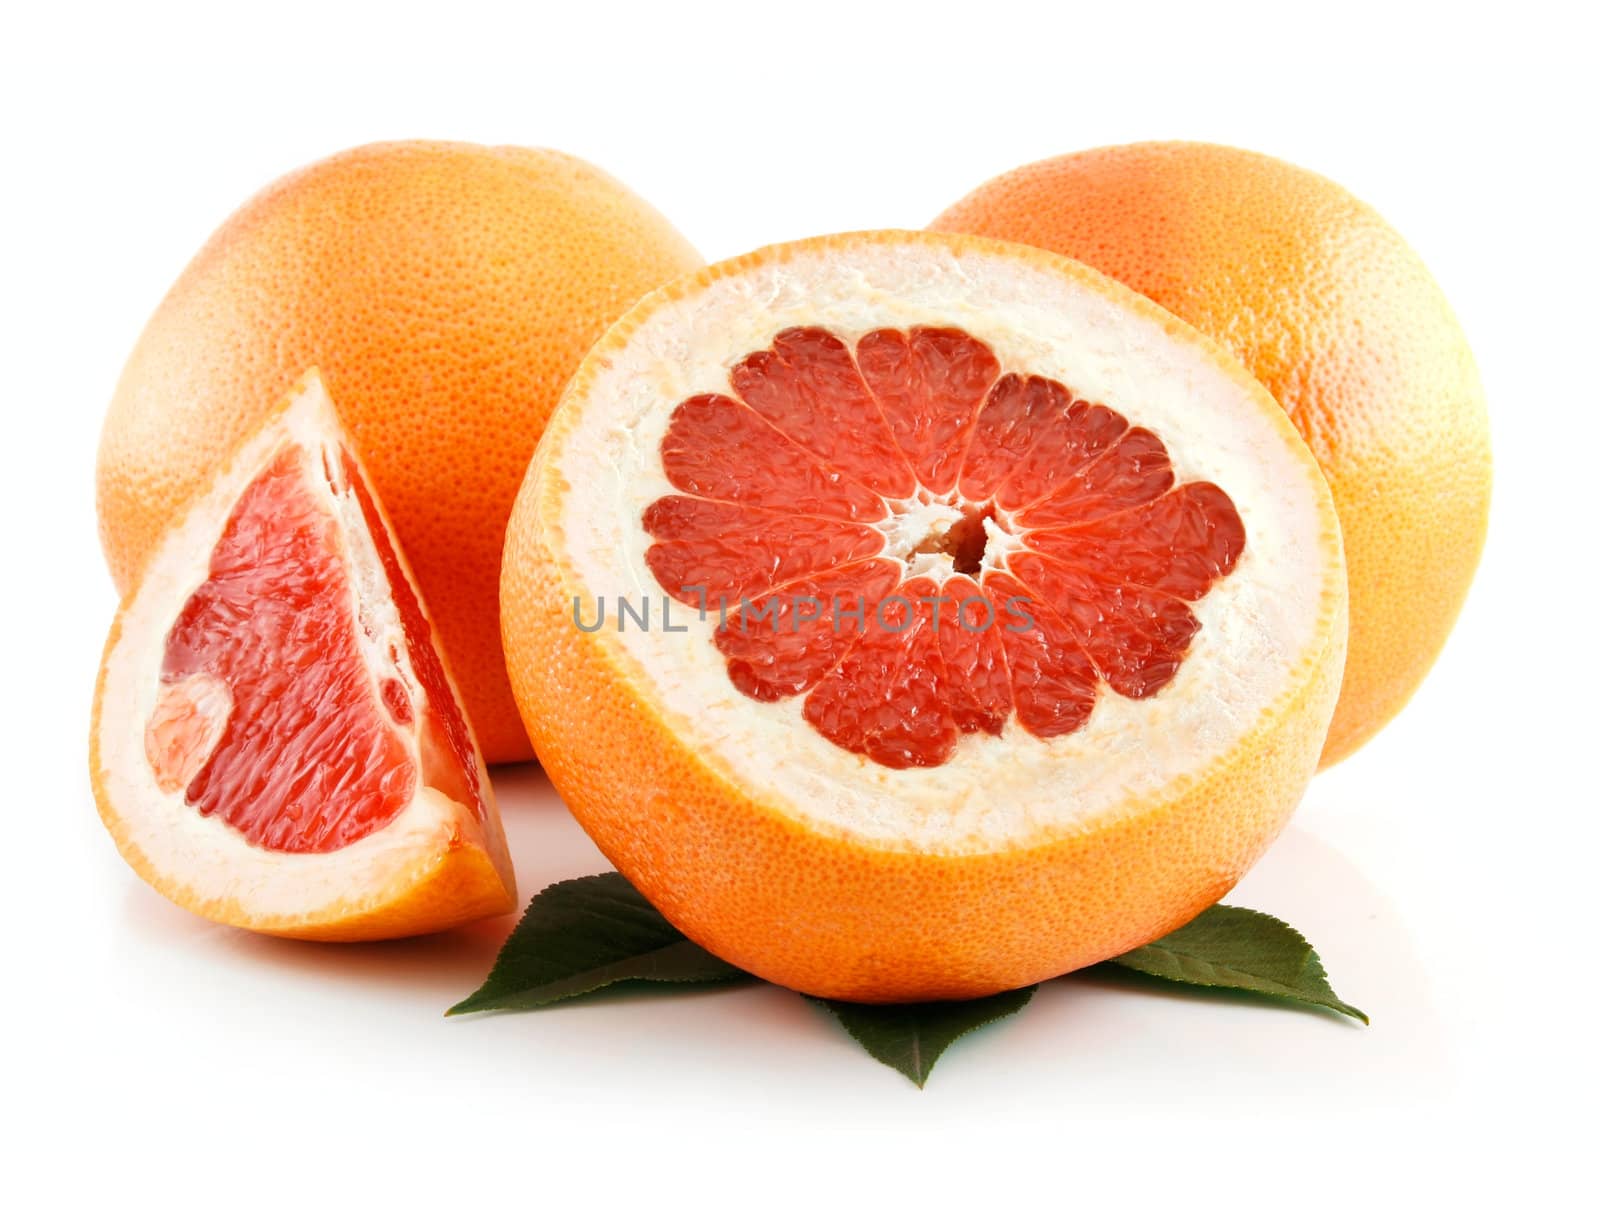 Ripe Sliced Grapefruit with Leaves Isolated on White by alphacell